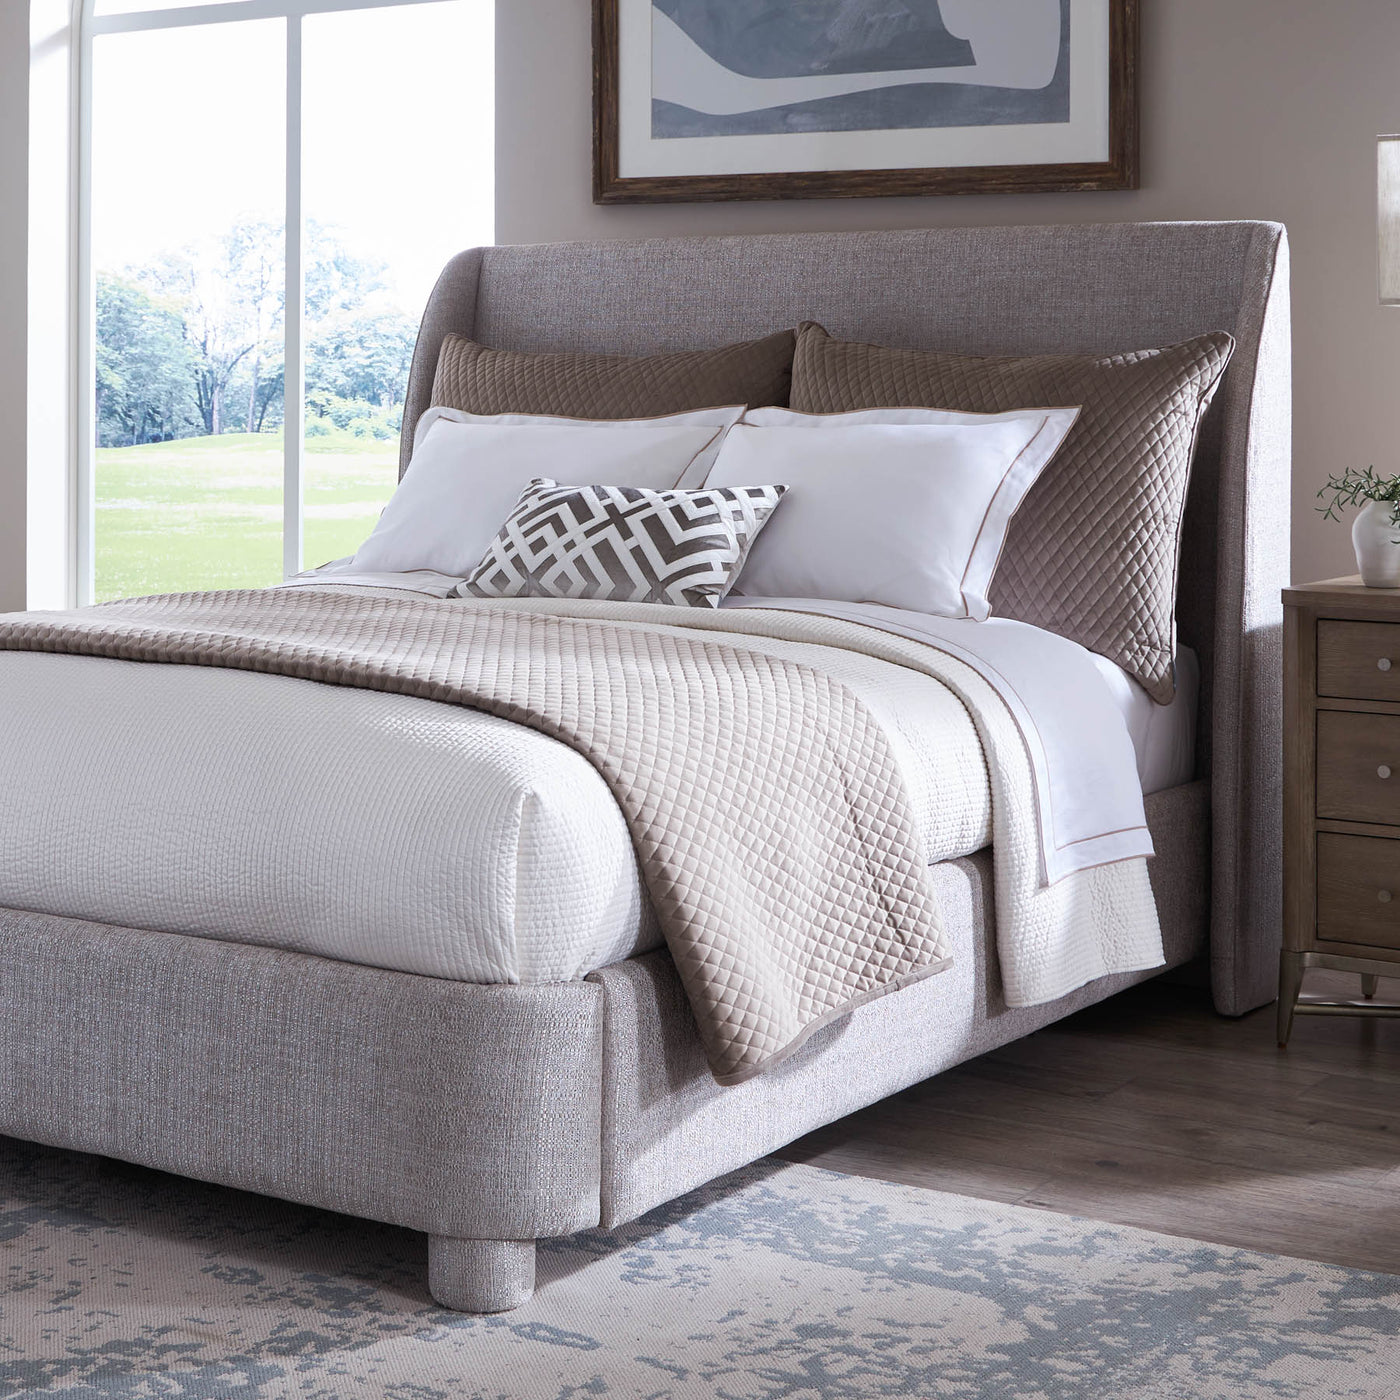 Serena Bed (Sand Woven Chenille / Cal King)